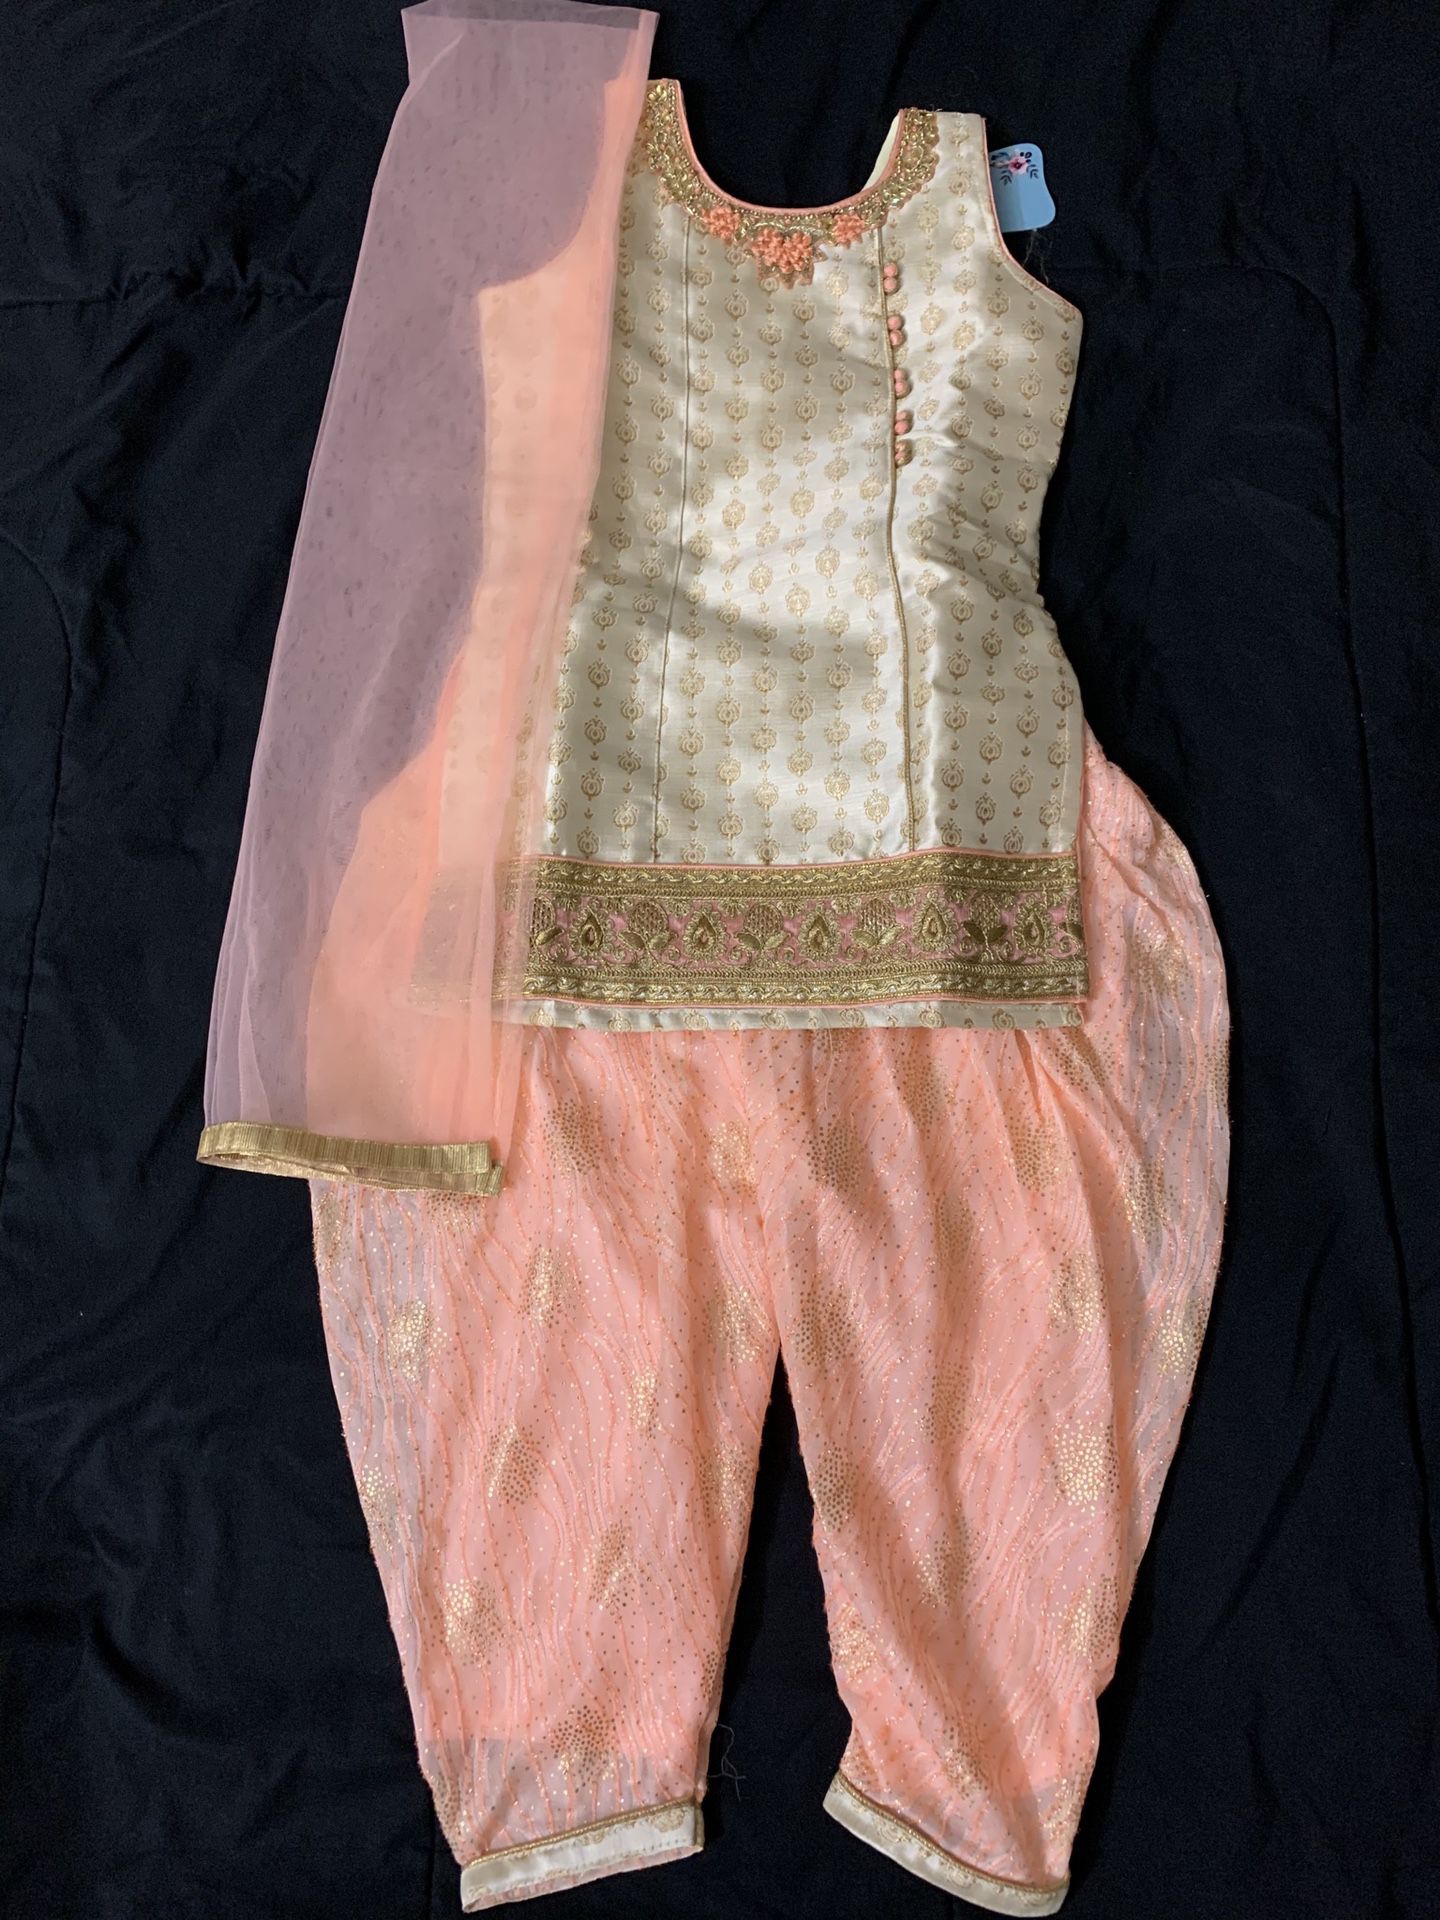 $27 Kids size 24 girls Indian dress for a 4-5 year old